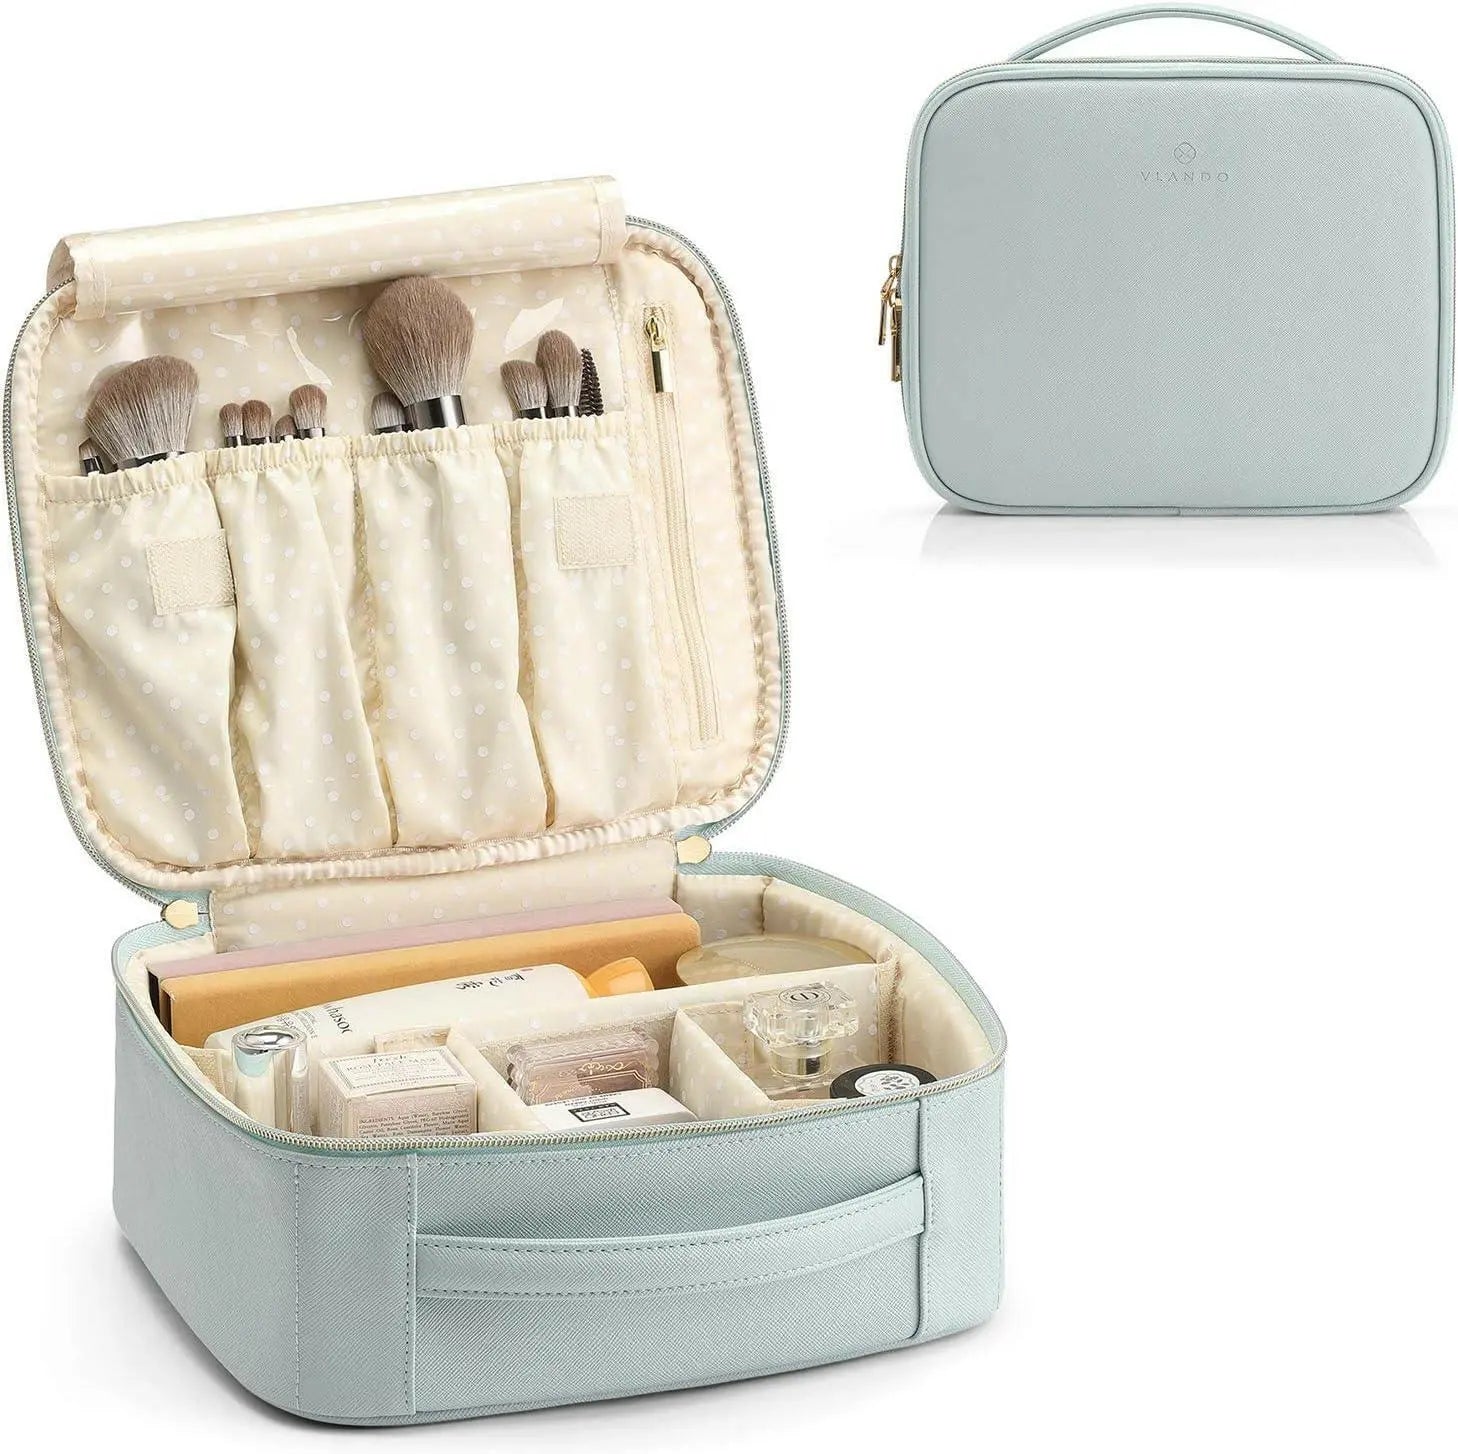 Travel Makeup Cosmetic Case Storage Bag Cosmetic Bag Portable with Adjustable Dividers